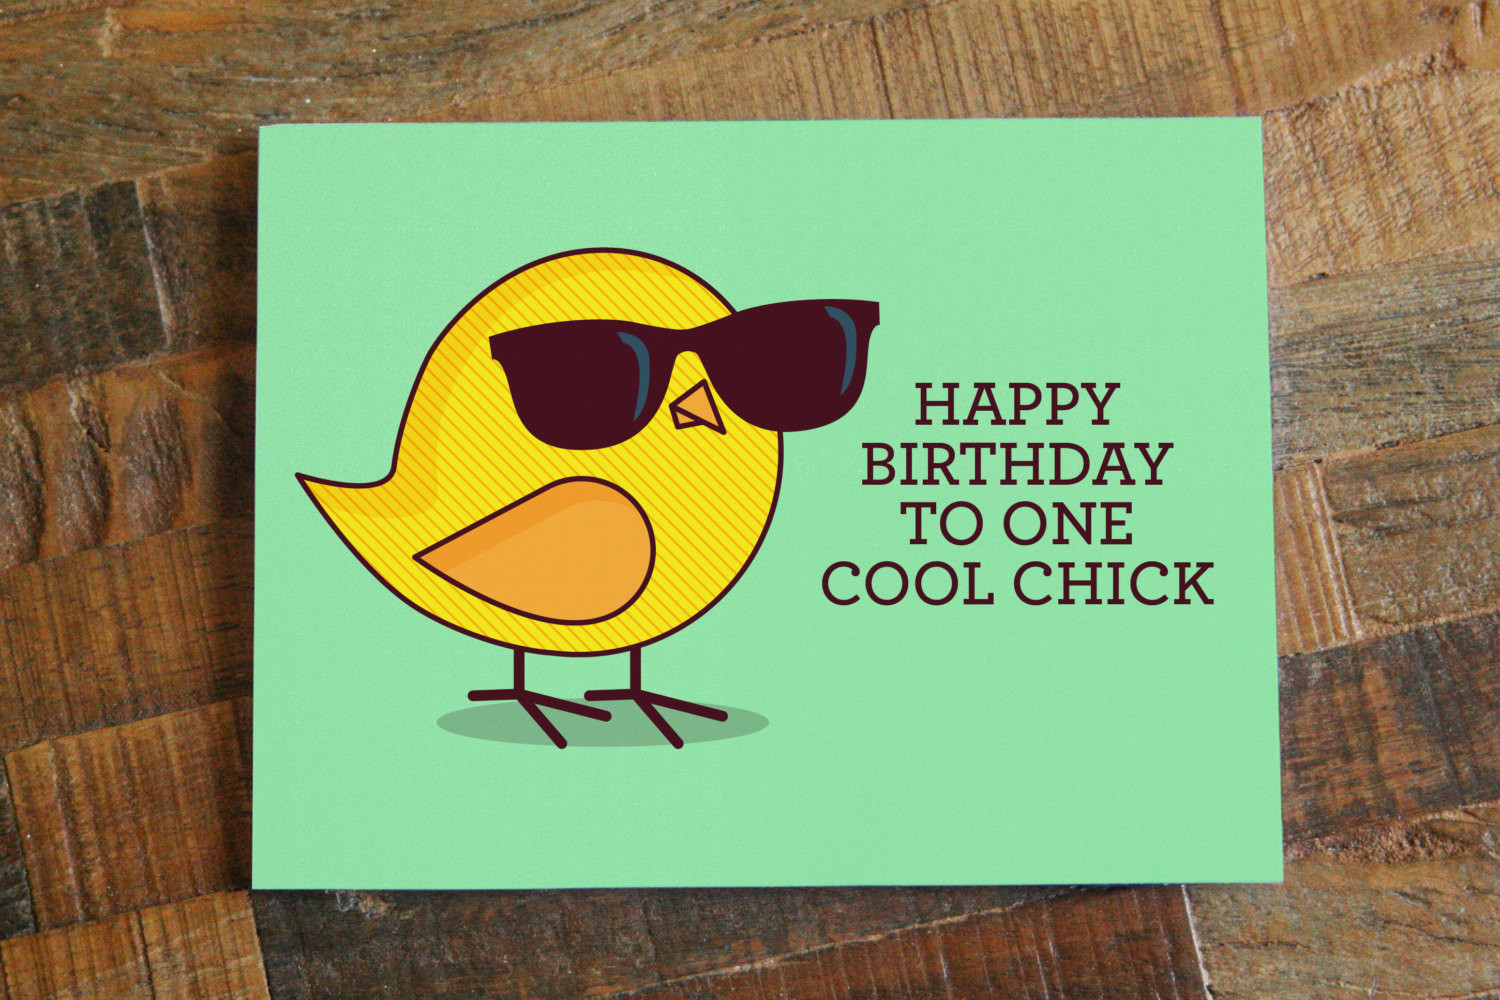 Funny Birthday Card Images
 Funny Birthday Card For Her "Happy Birthday to e Cool